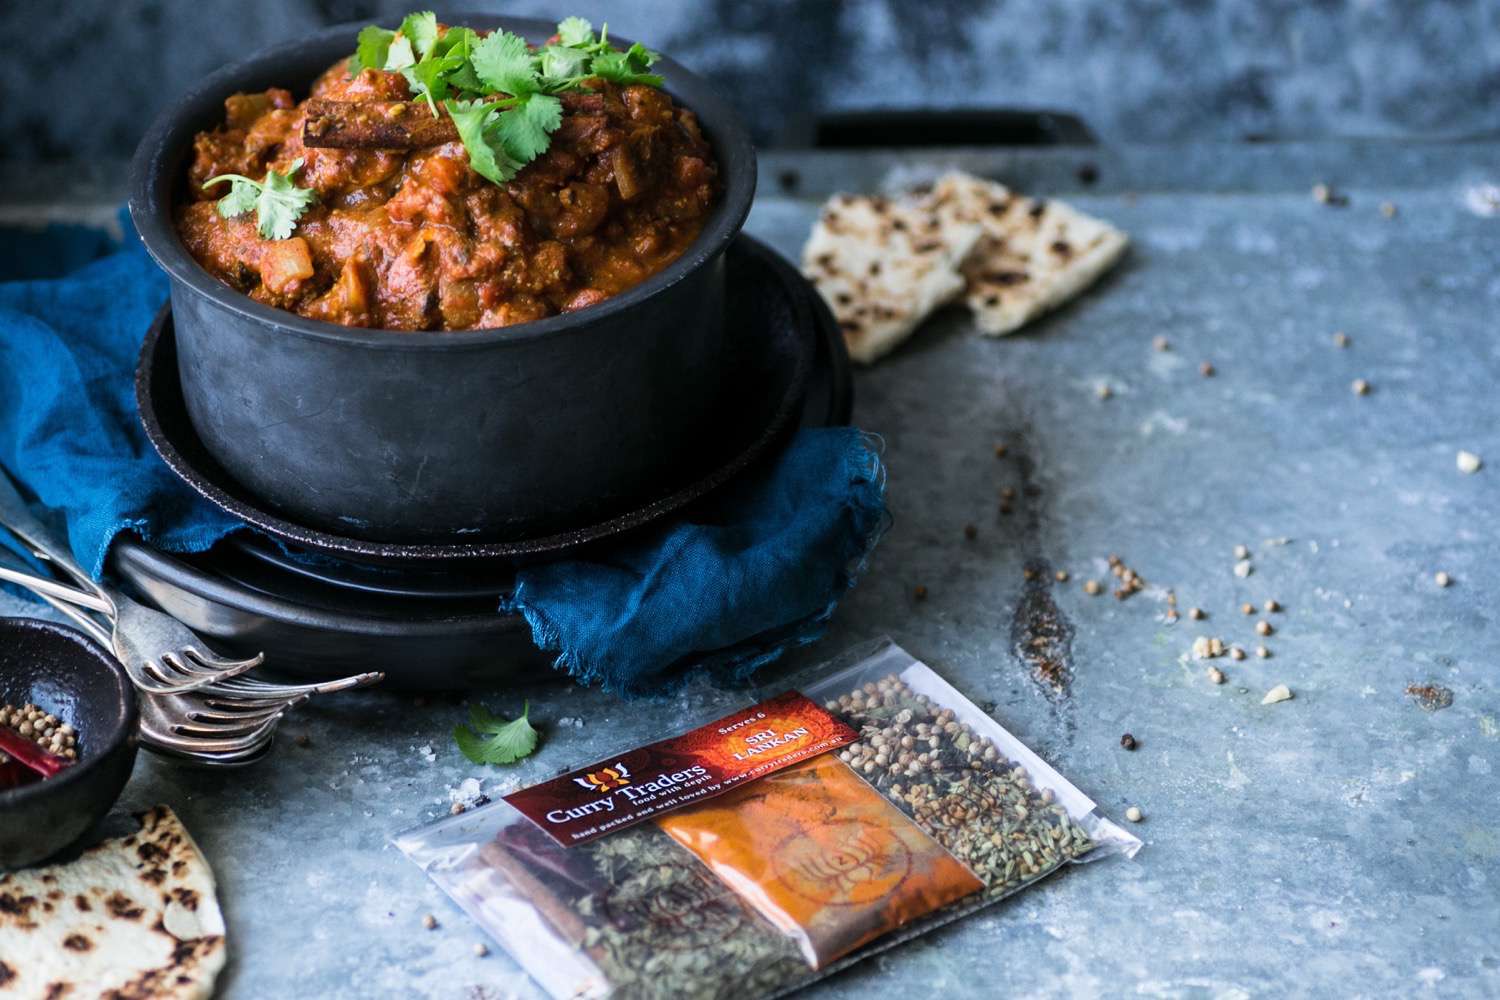 Sri Lankan Gourmet Curry Kit to make at home